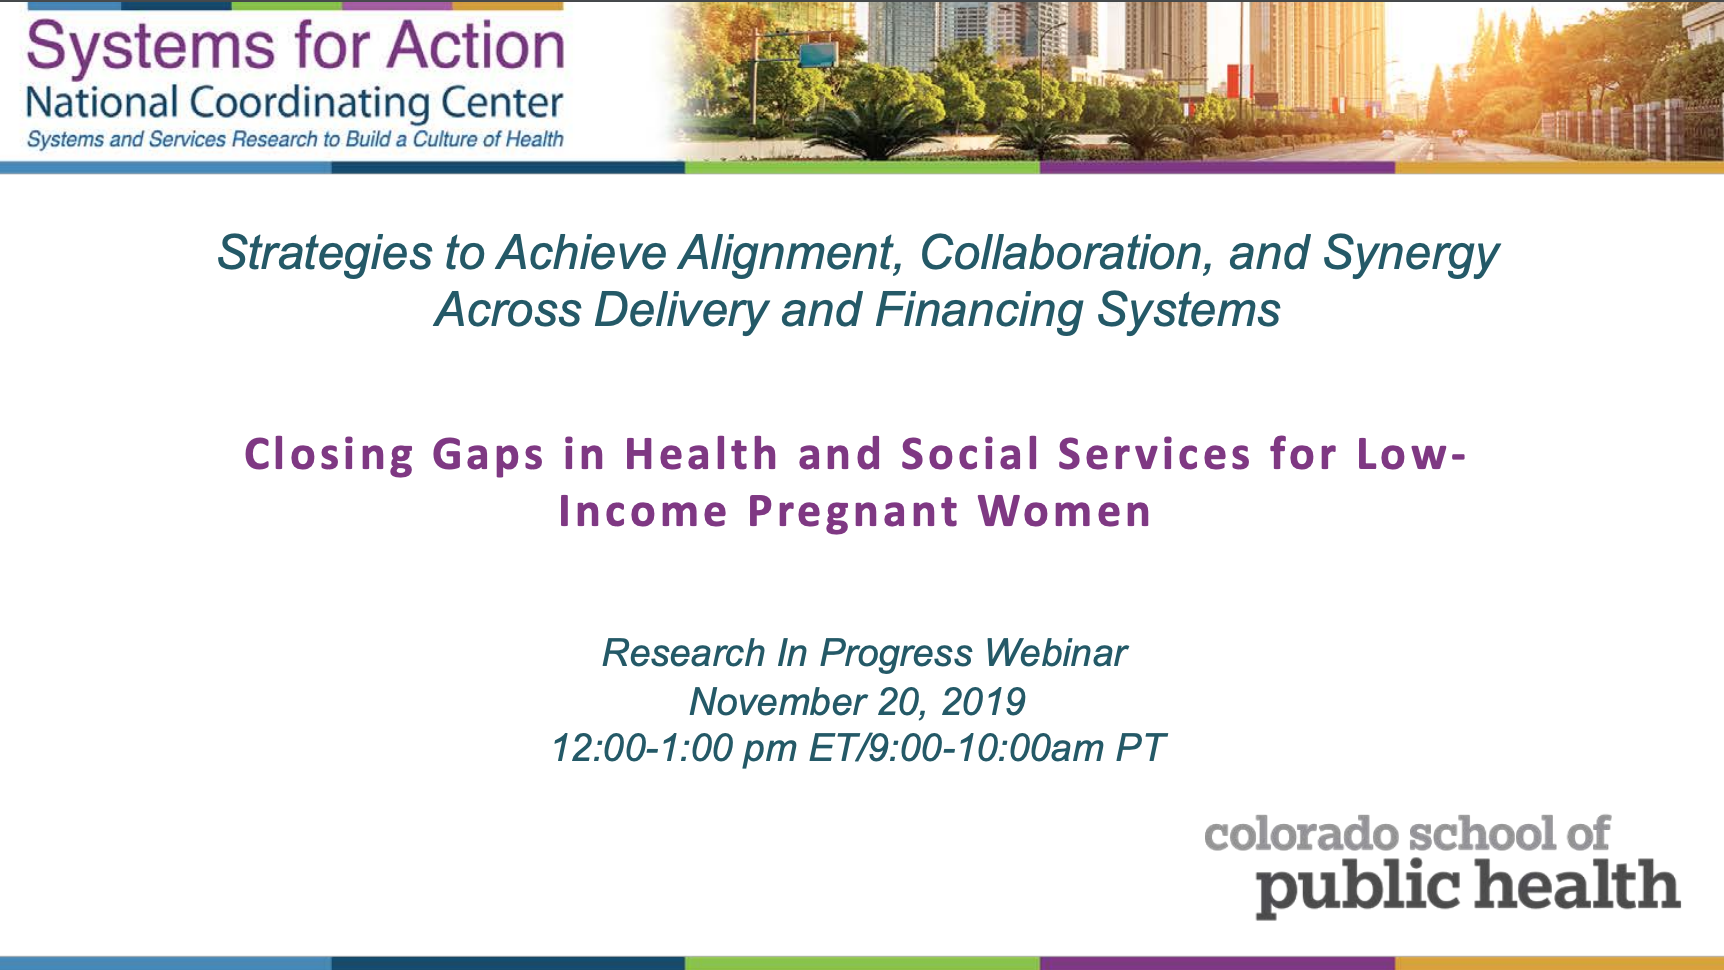 Strategies to Achieve Alignment, Collaboration, and Synergy Across Delivery and Financing Systems: Closing Gaps in Health and Social Services for Low-Income Pregnant Women